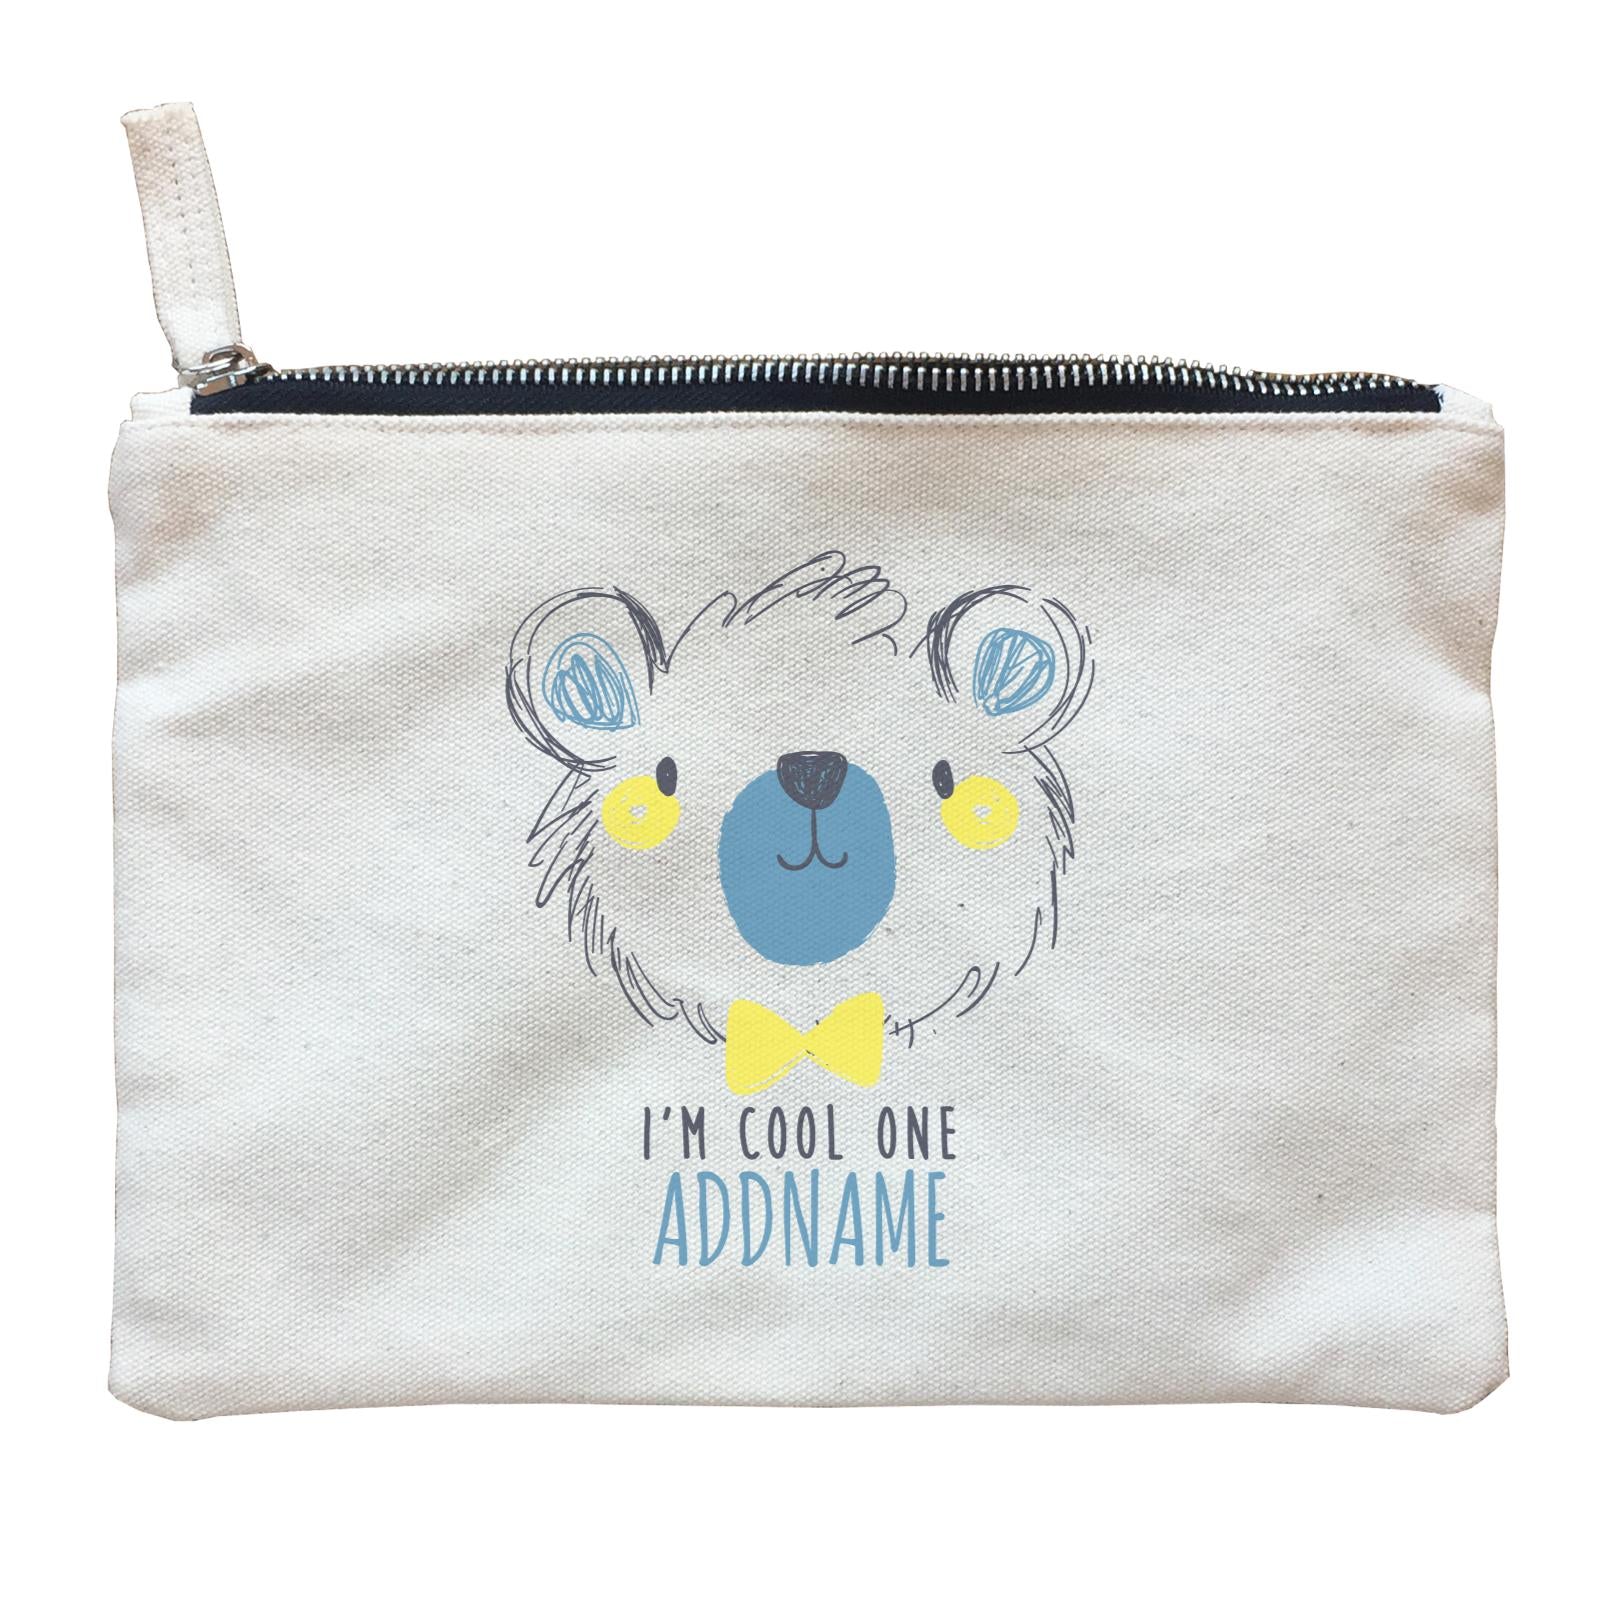 I'm Cool One Bear Addname Zipper Pouch